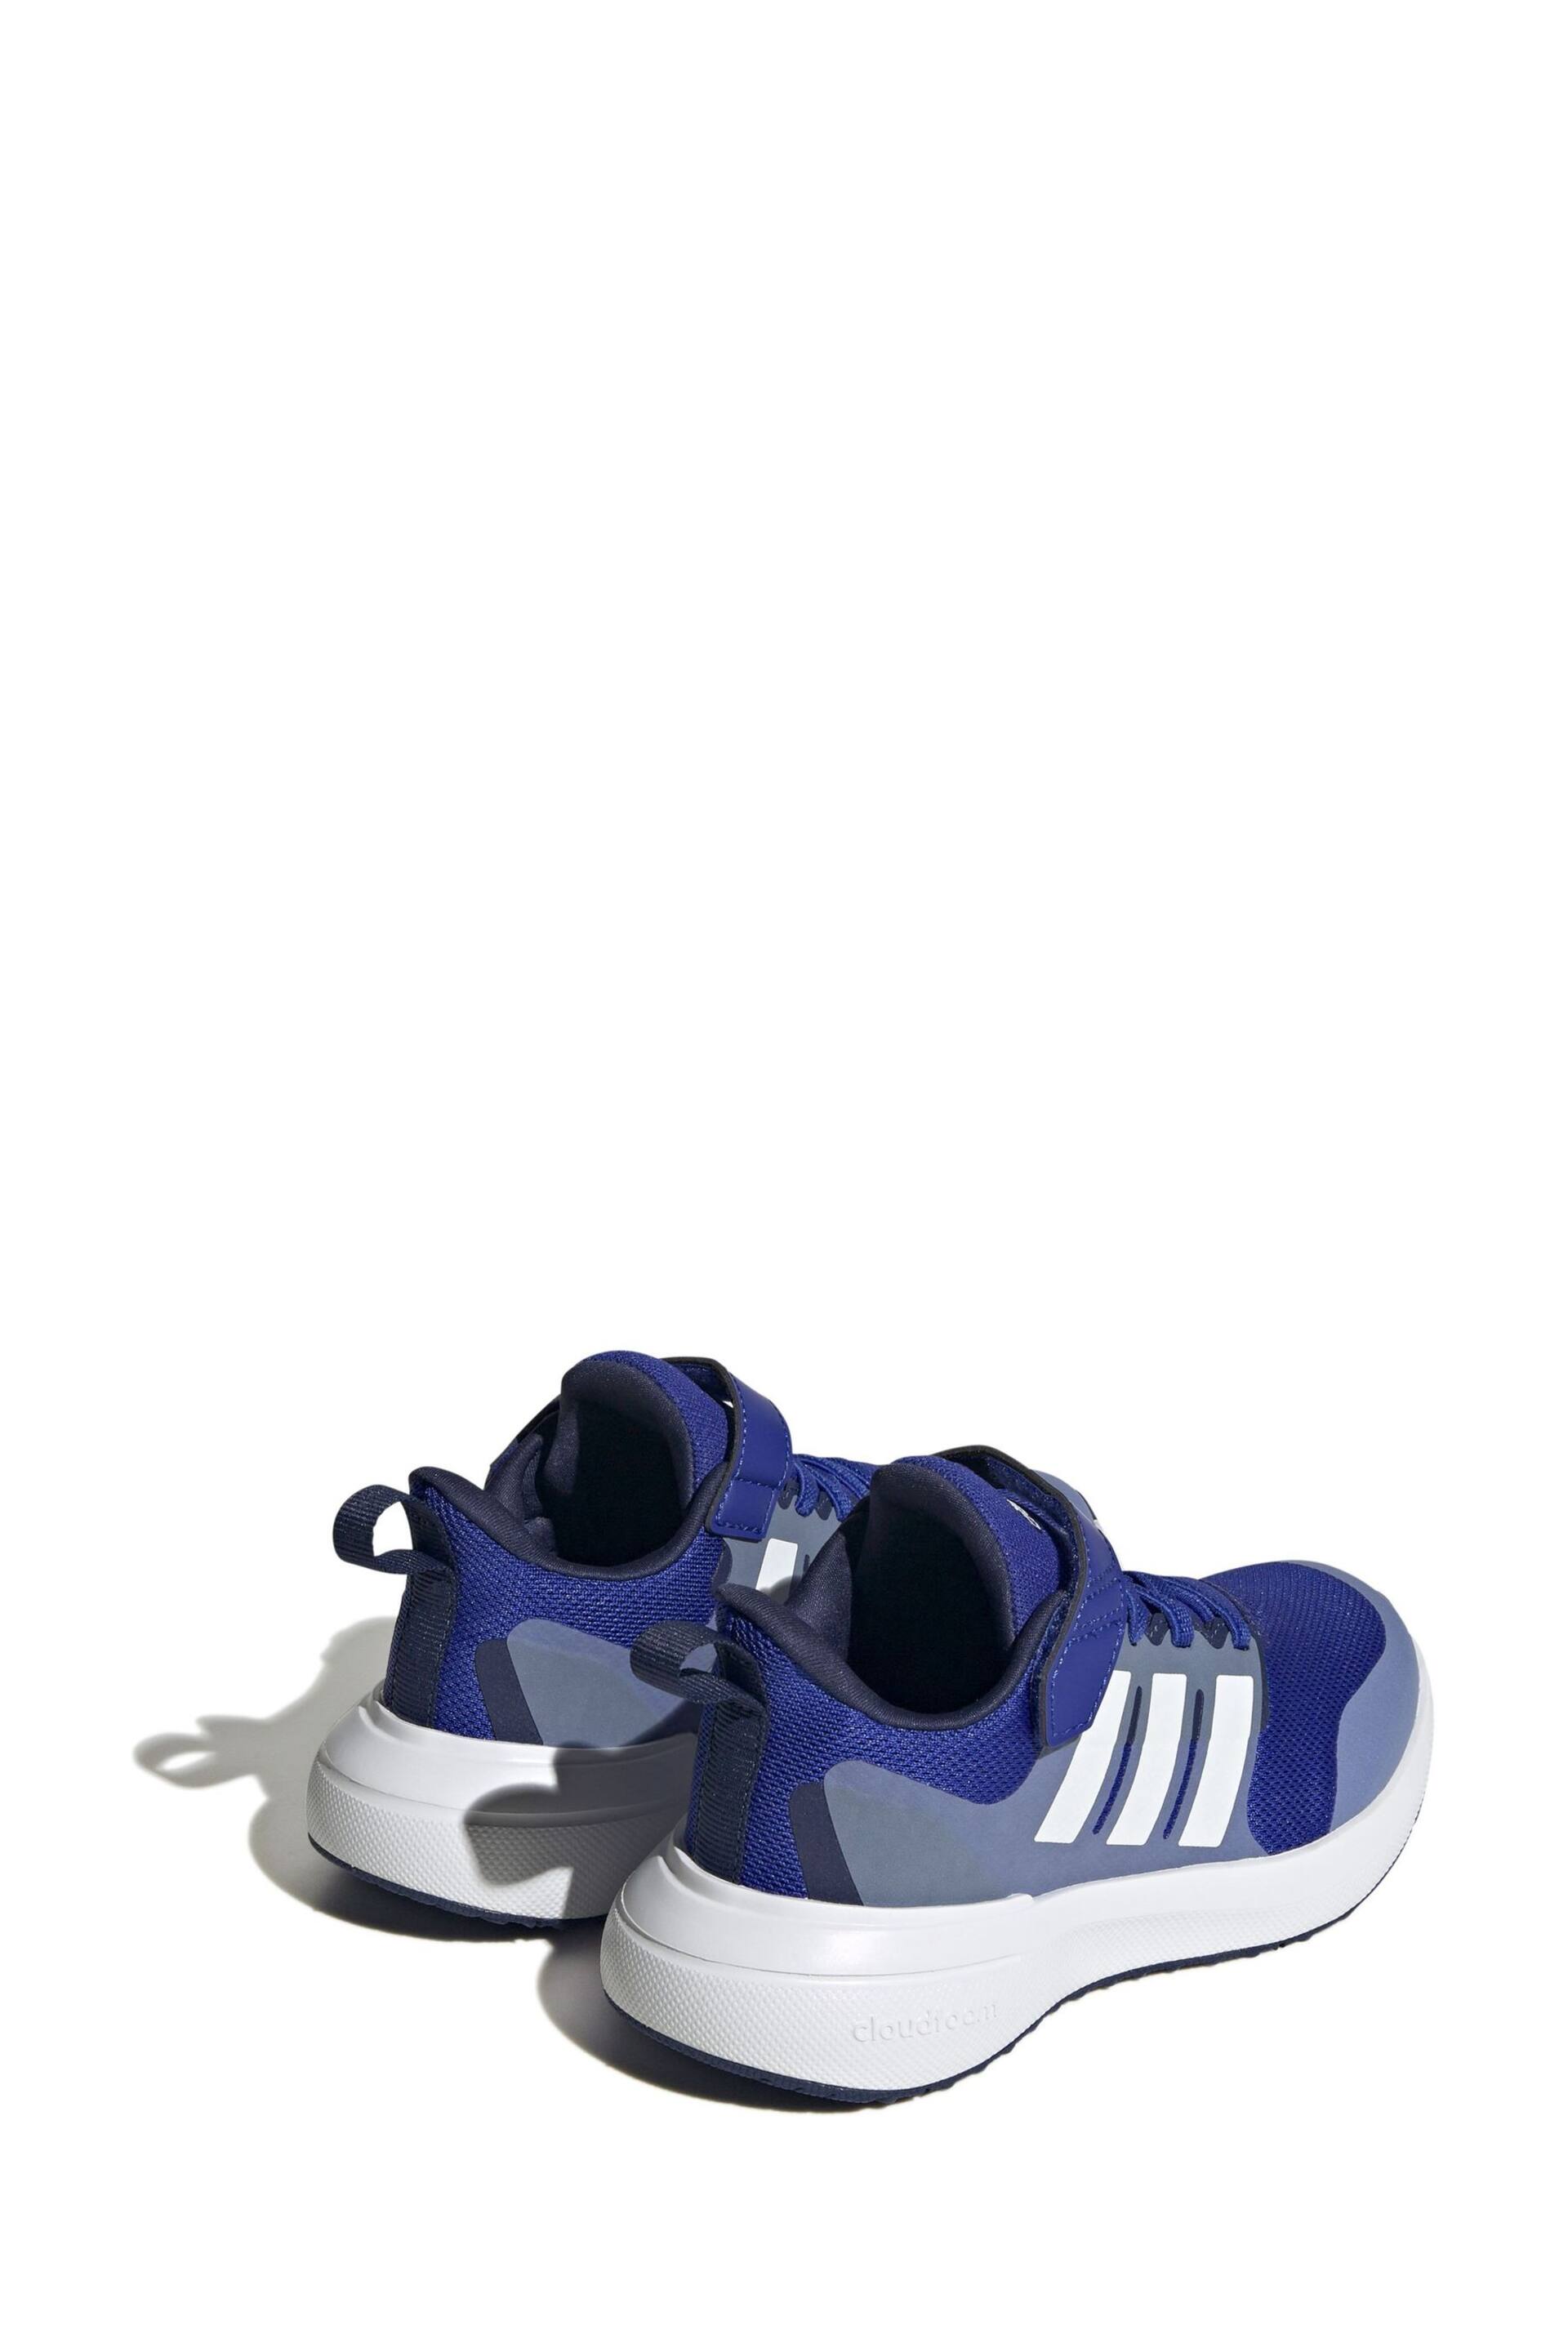 adidas Blue/White Kids Sportswear Fortarun 2.0 Cloudfoam Elastic Lace Top Strap Trainers - Image 4 of 8